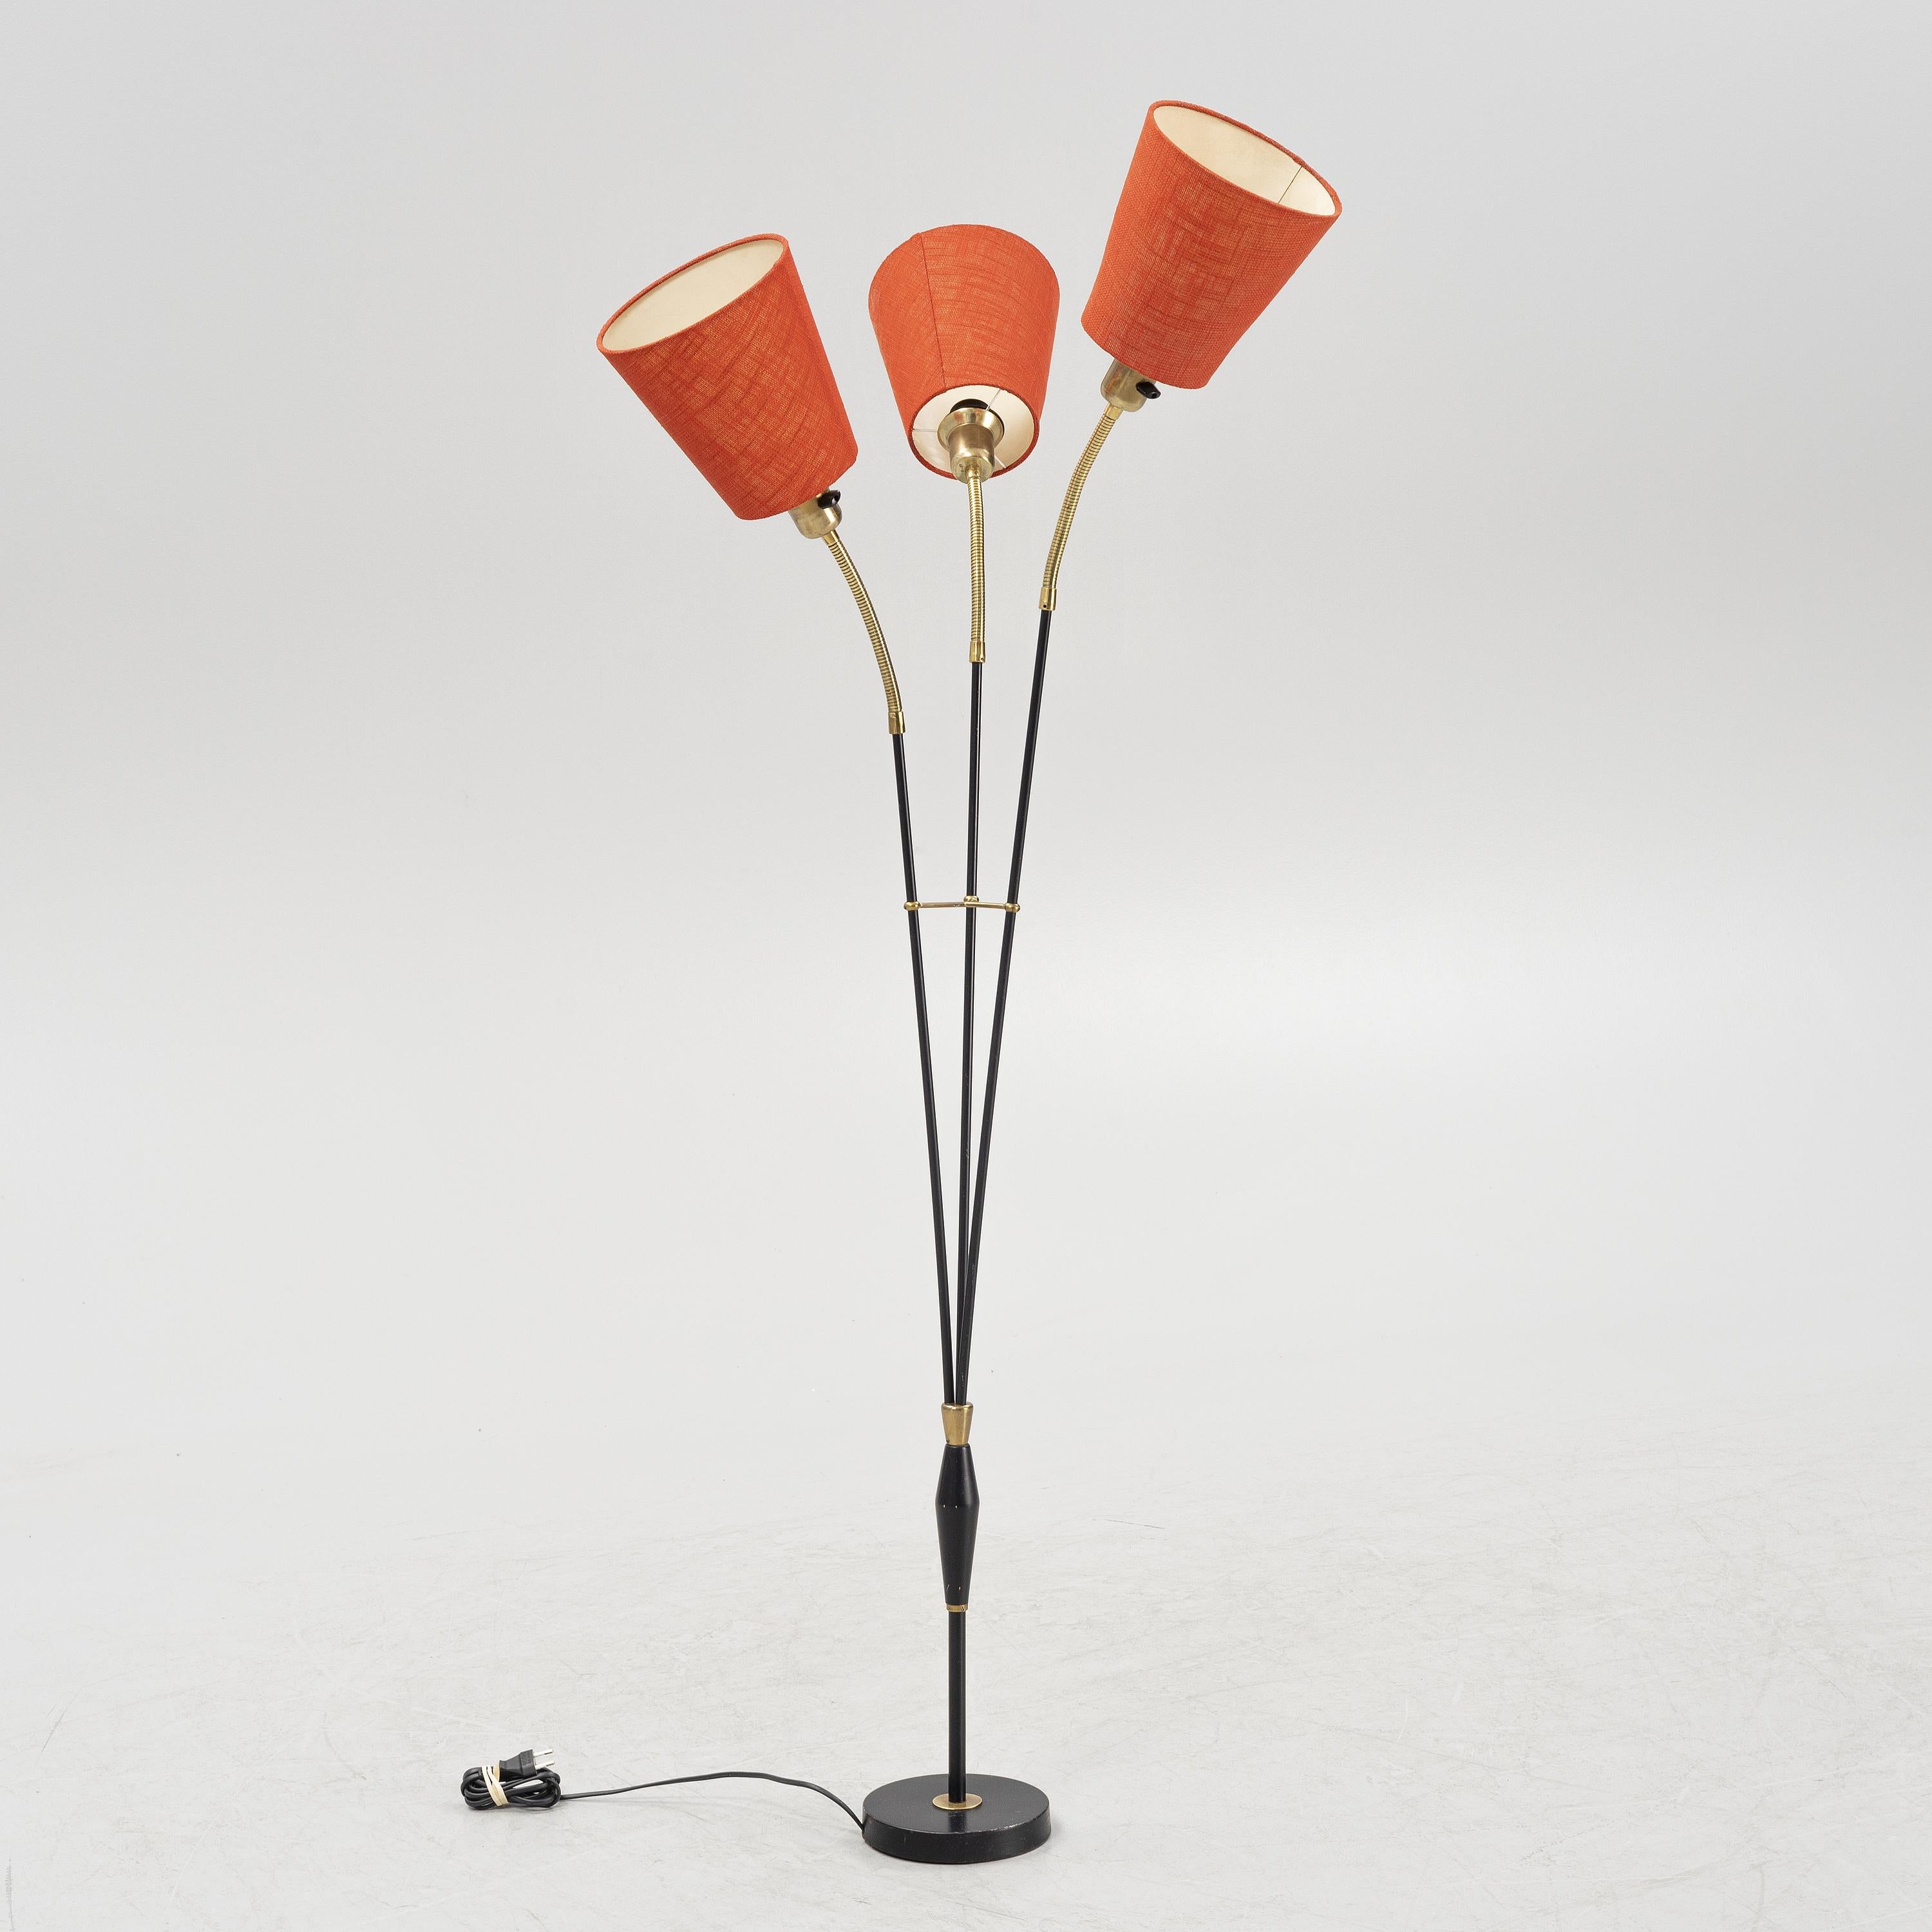 Cast iron base, three arms with goose neck each fitted with E27 bakelite sockets and red lamp shades. Designed in Sweden in the 1950s by Hans Bergström for Atelje Lyktan.